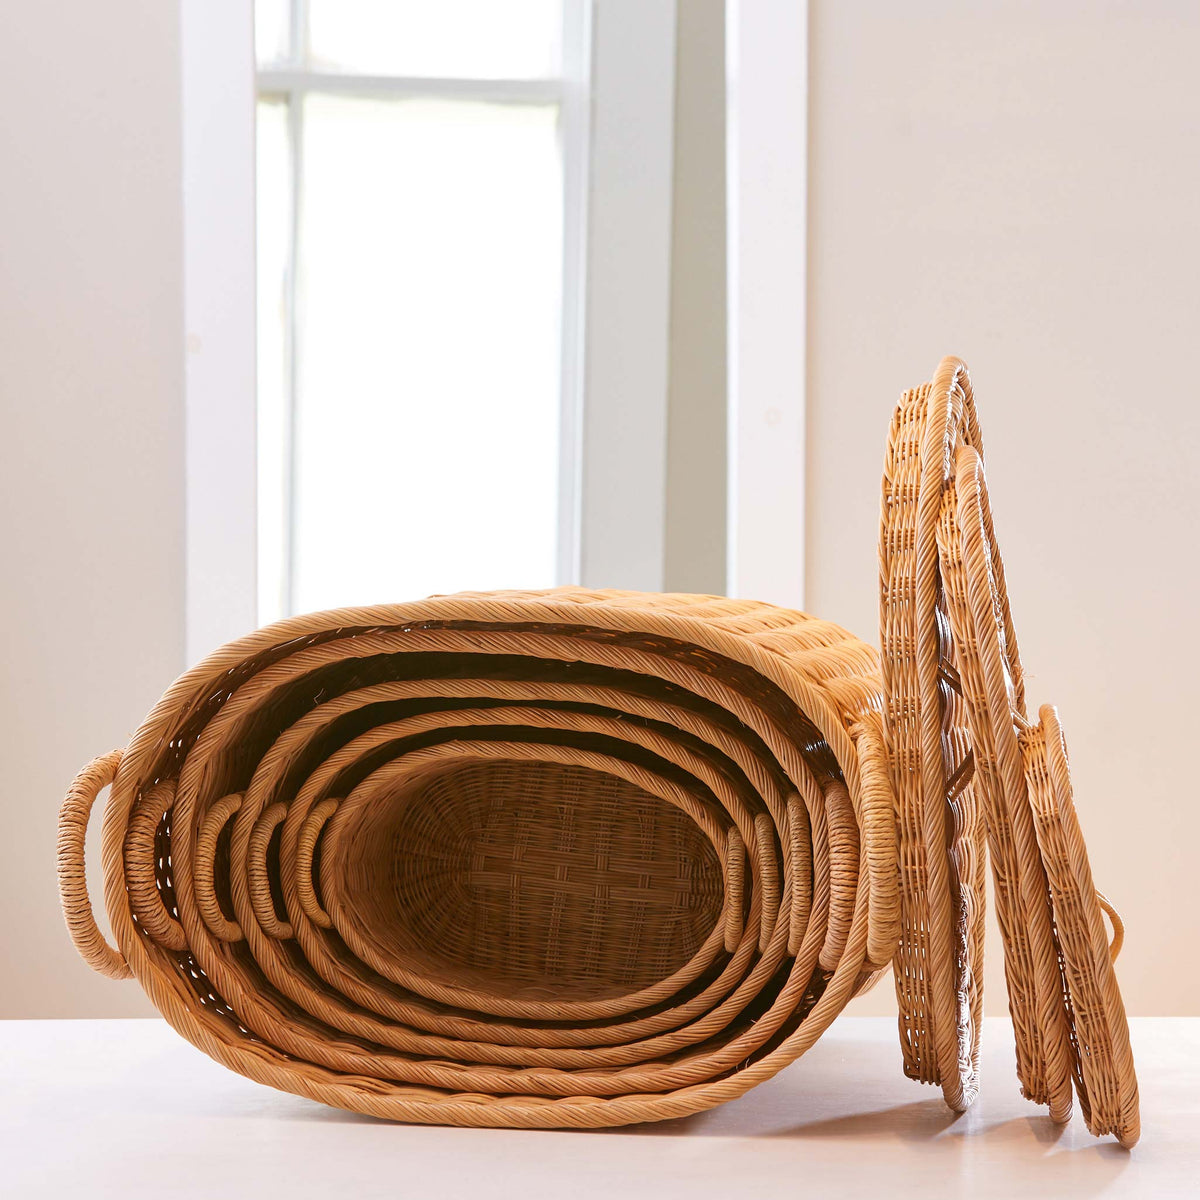 Oval rattan storage baskets. Unique storage baskets with lids and handles. 5 sizes from large storage baskets to small. Perfect baskets for shelves.